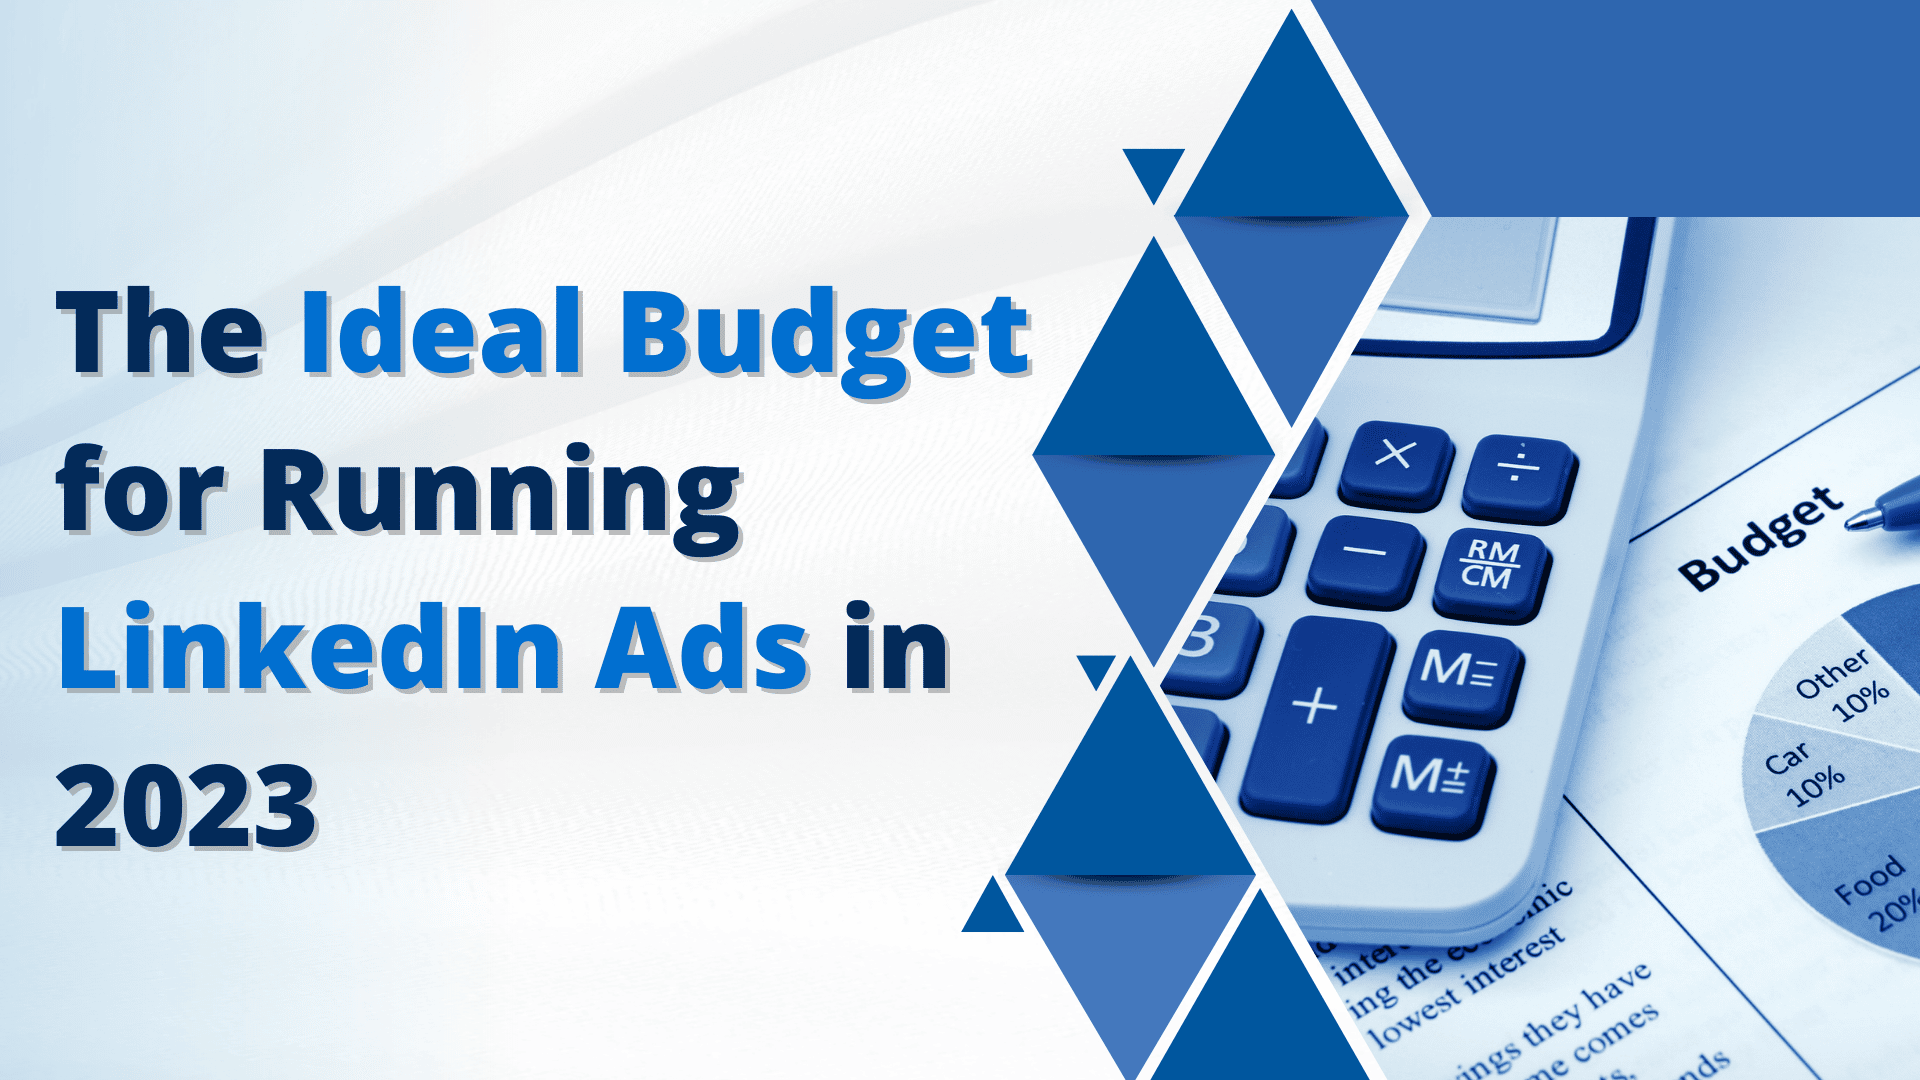 The Ideal Budget for Running LinkedIn Ads in 2023